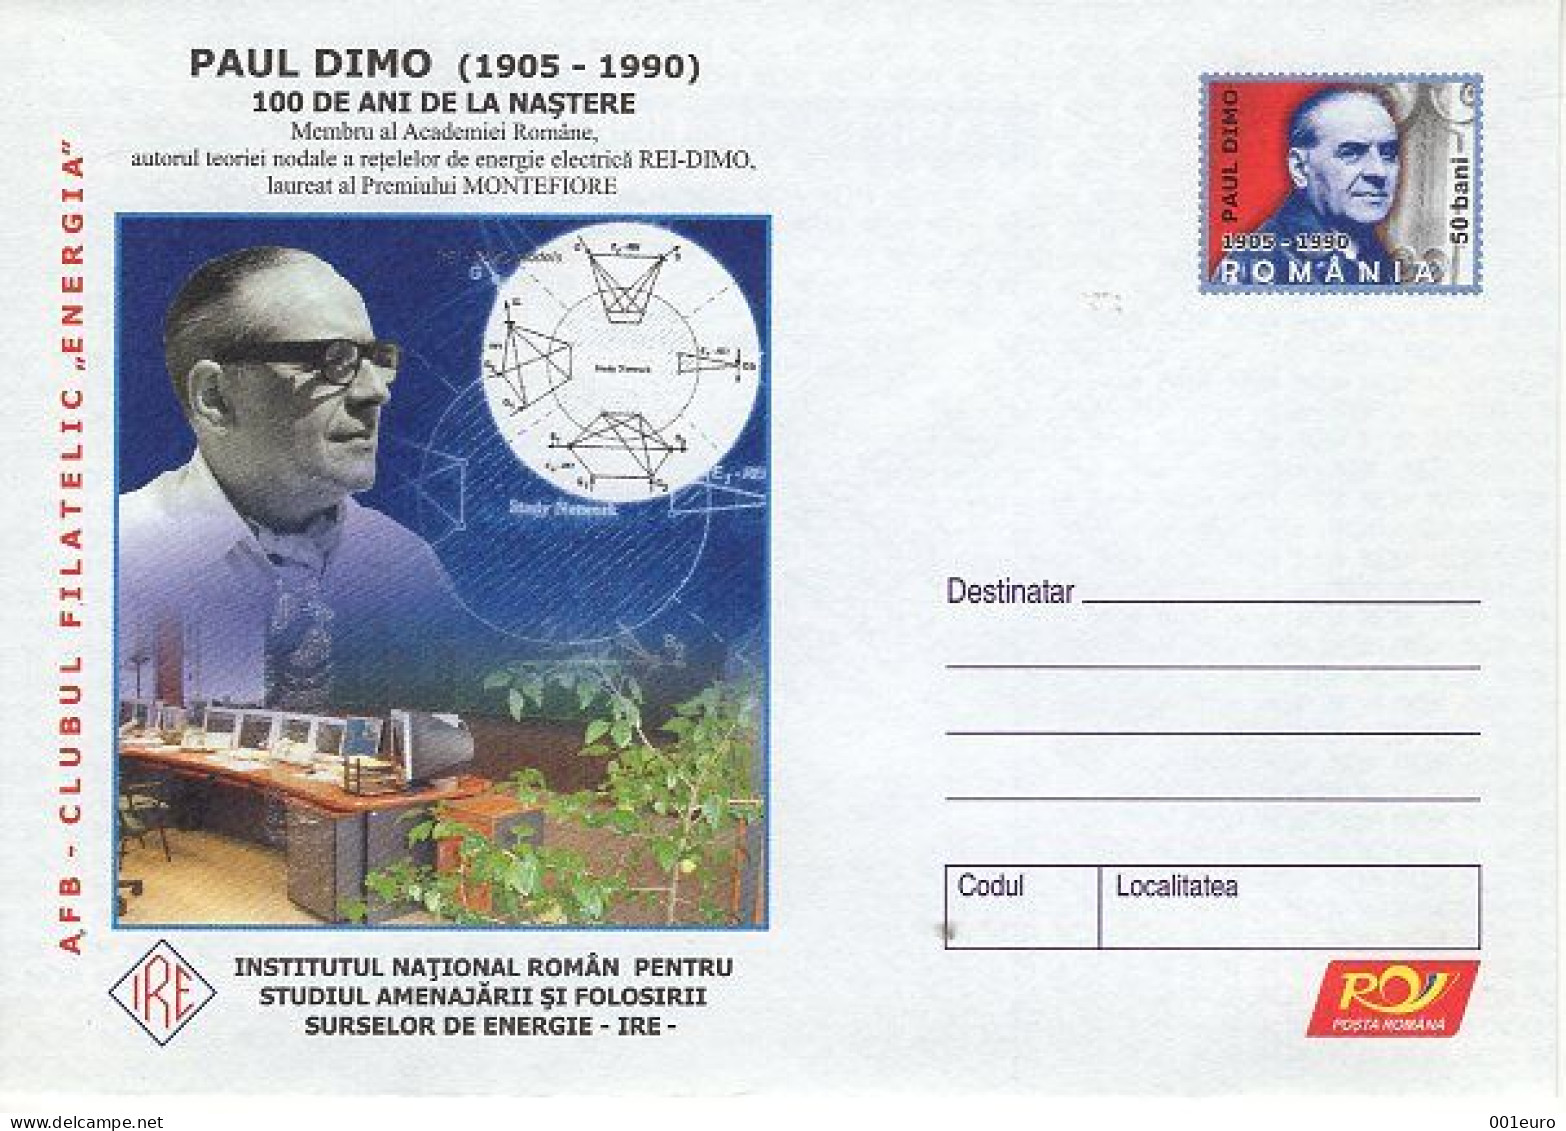 ROMANIA 066y2005: Paul Dimo, Energy & Computers, Unused Prepaid Postal Stationery Cover - Registered Shipping! - Postal Stationery